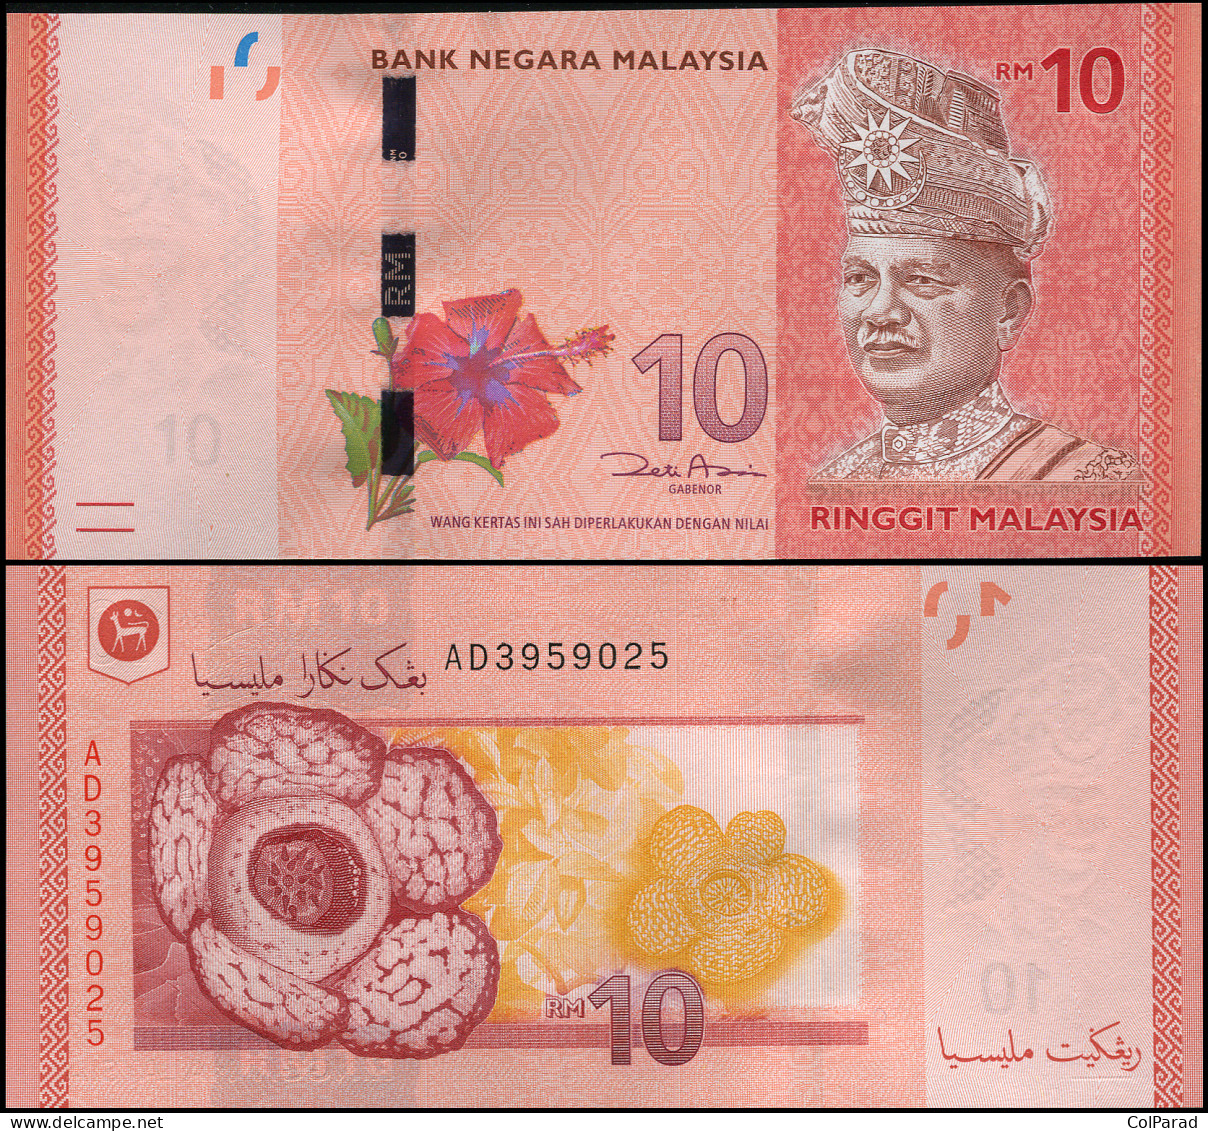 MALAYSIA 10 RINGGIT - ND (2012) - Paper Unc - P.53a Banknote - Malaysie